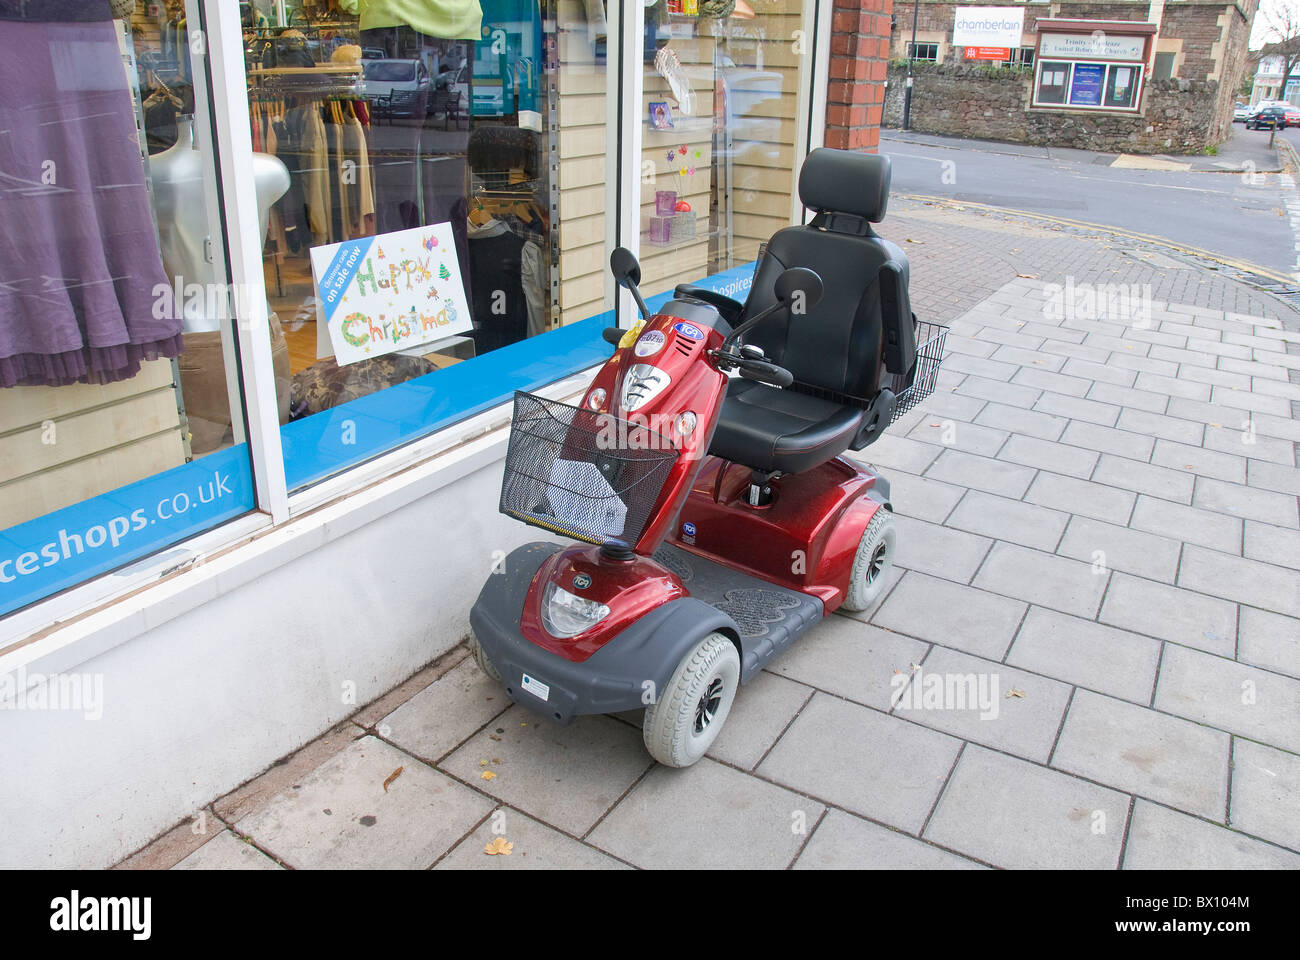 Electric mobility scooter outside of charity shop, England, UK Stock Photo